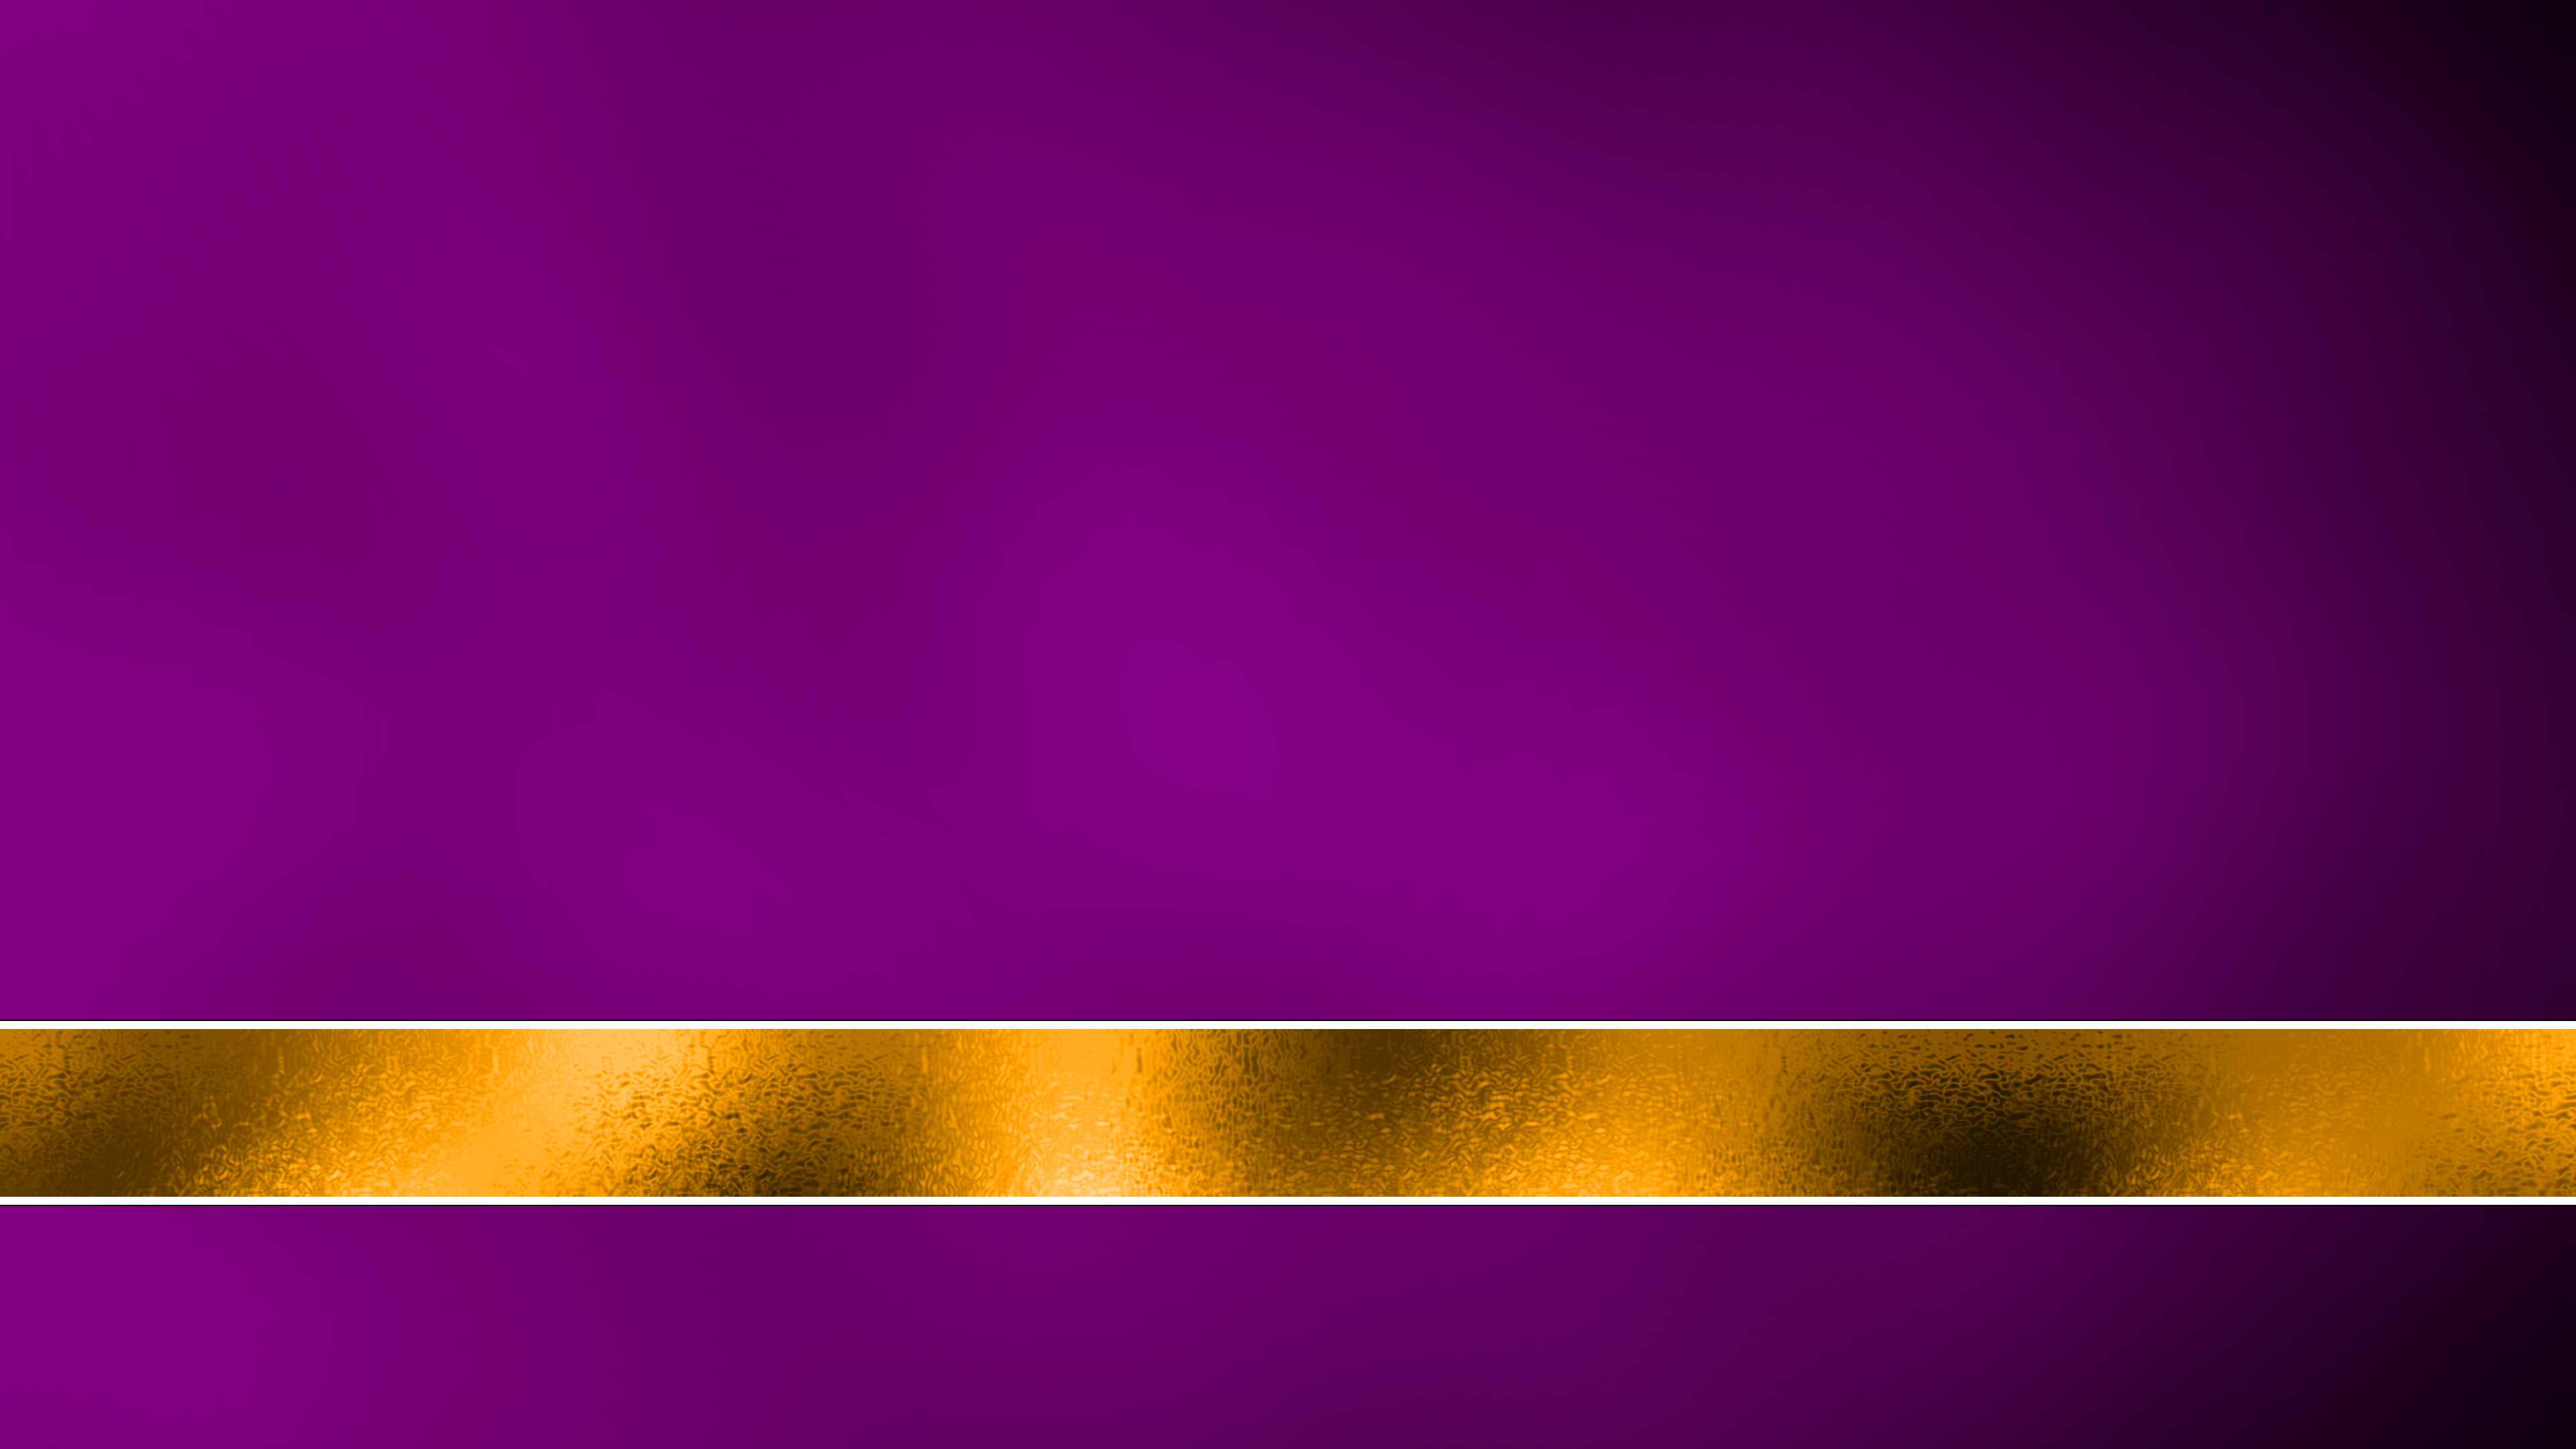 Purple and Gold 4k Wallpaper by SirLavaH